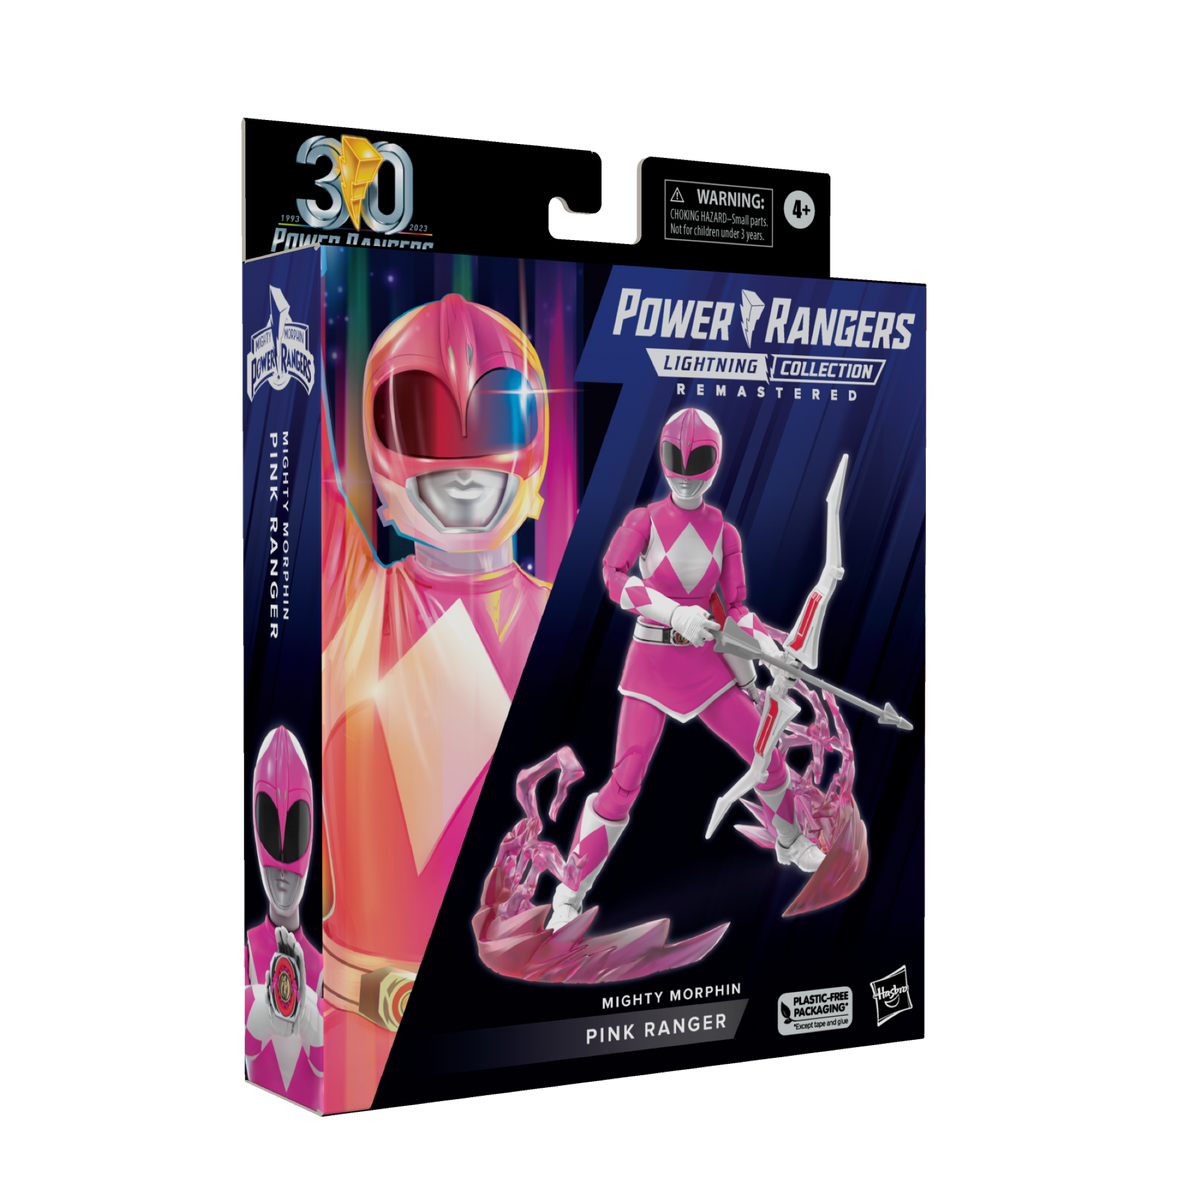 Lightning Collection Remastered Mighty Morphin Pink Ranger